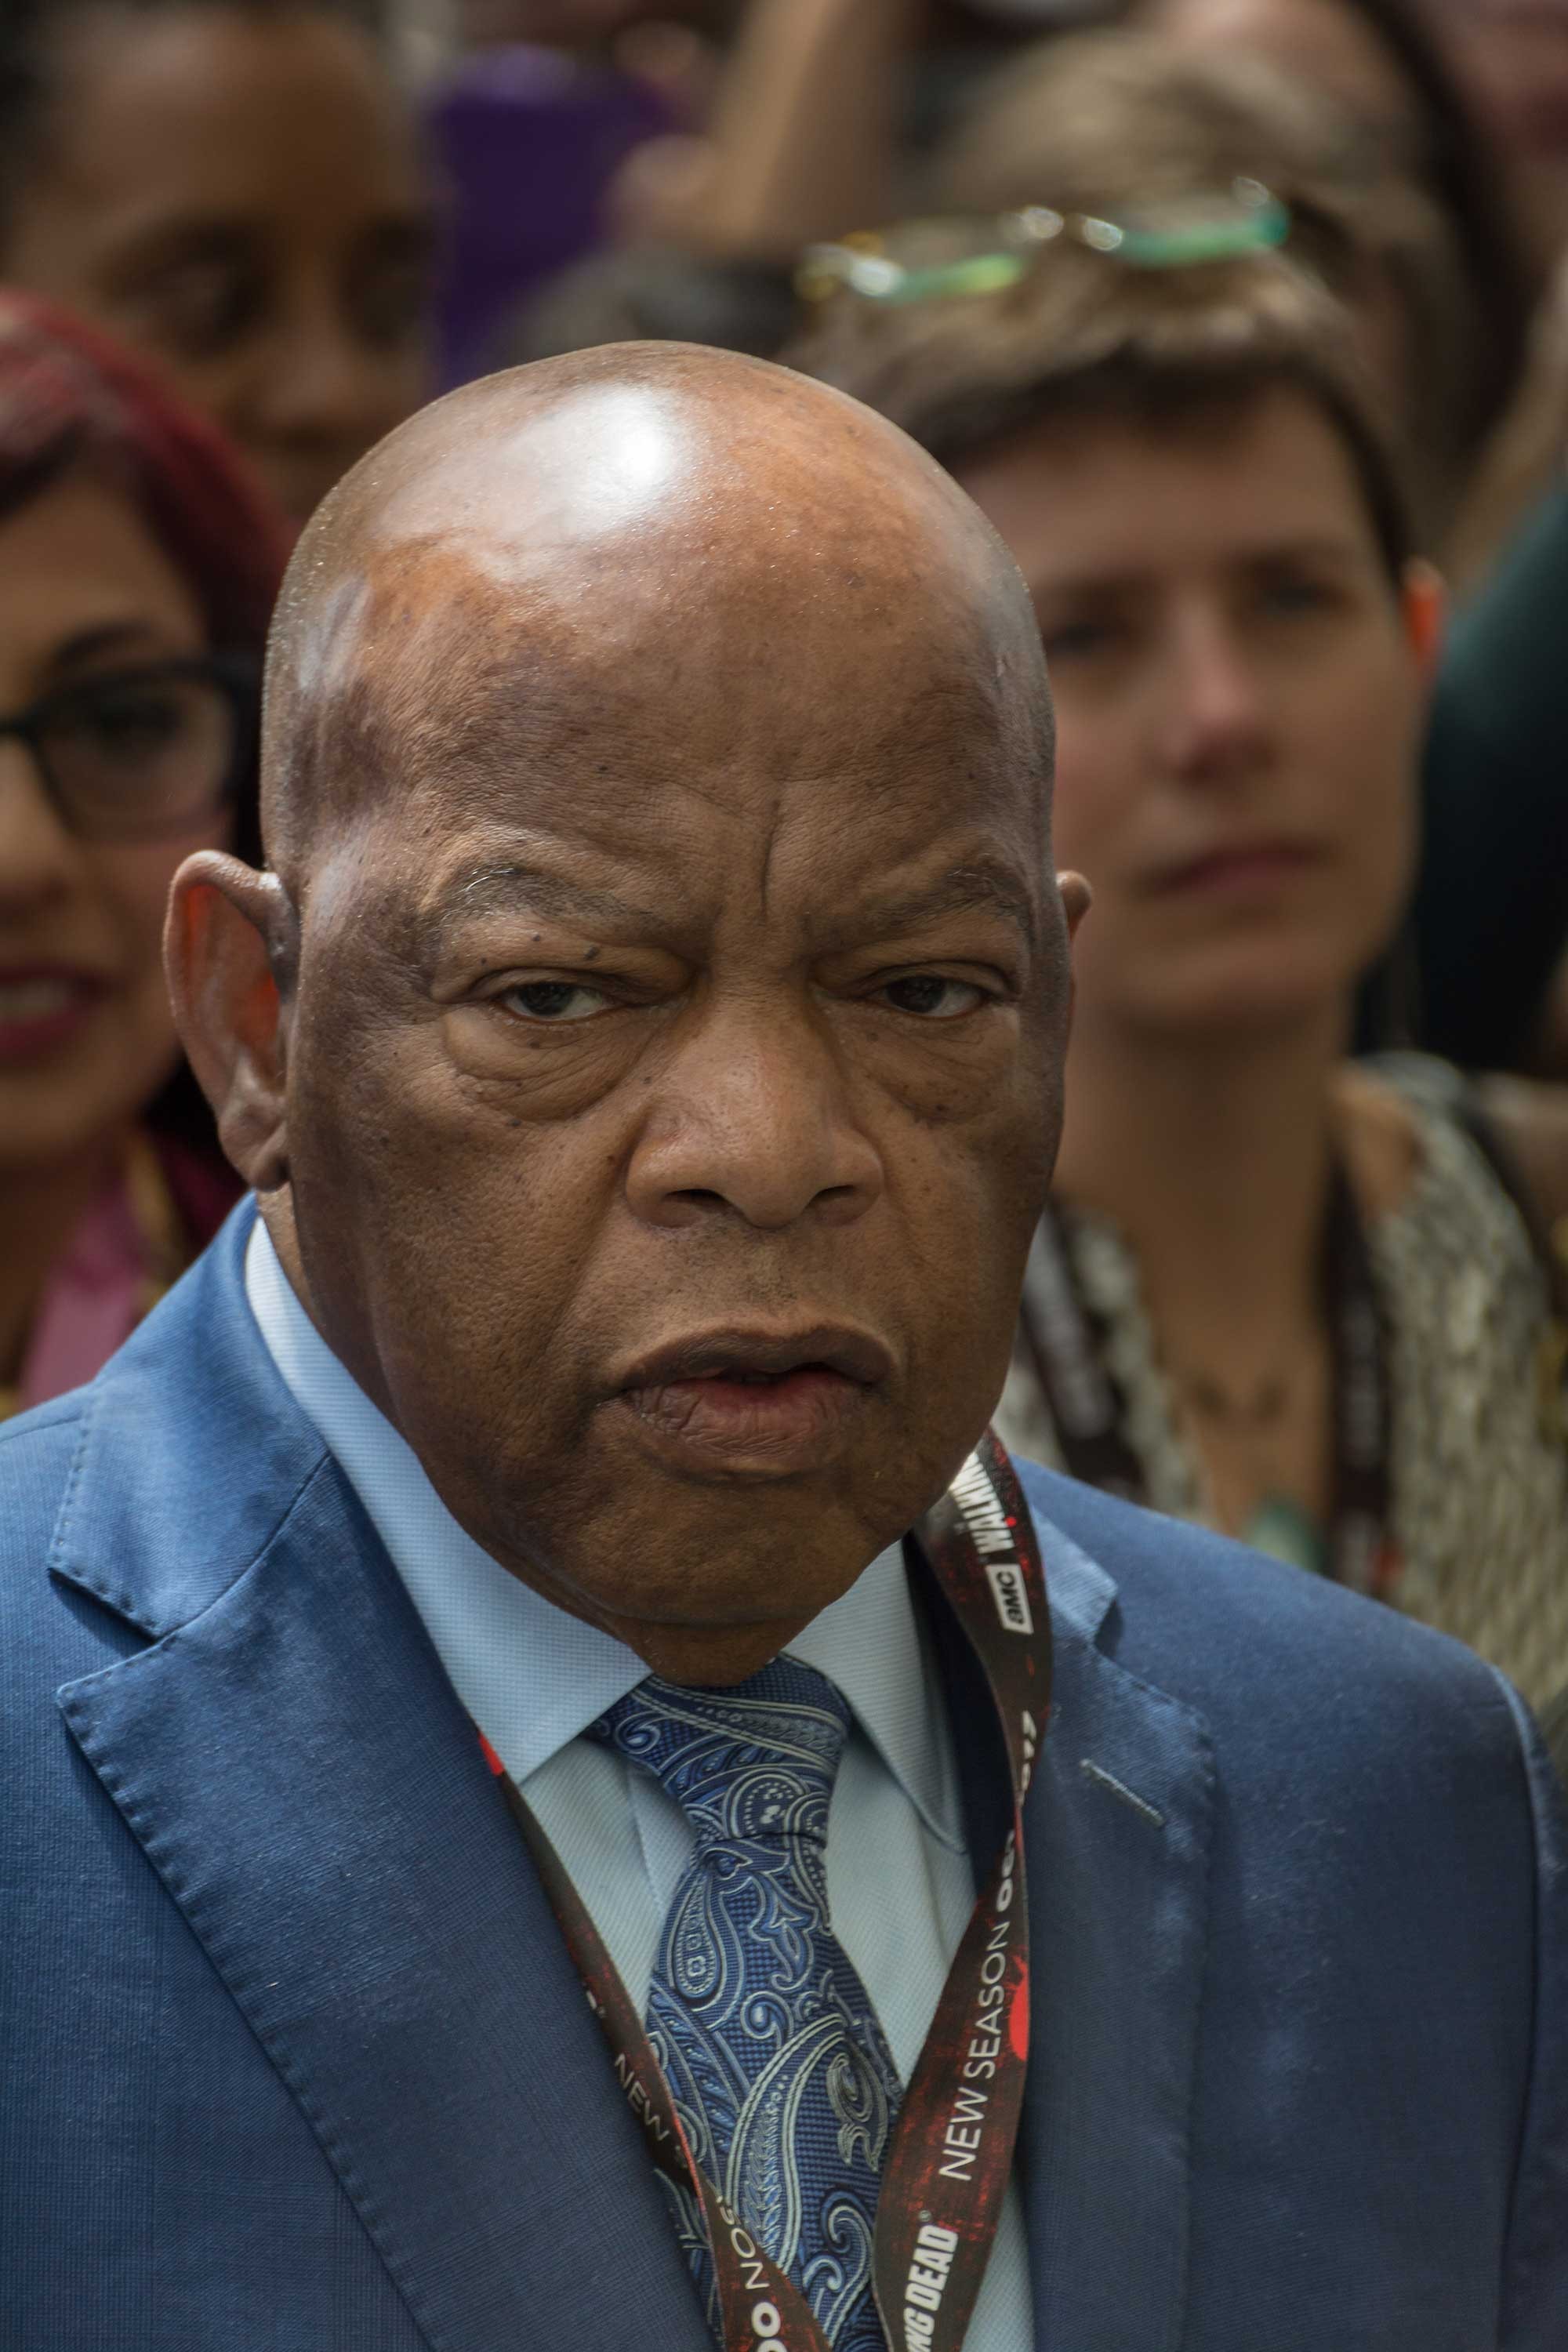 Representative John Lewis, beloved icon in the fight for voting rights